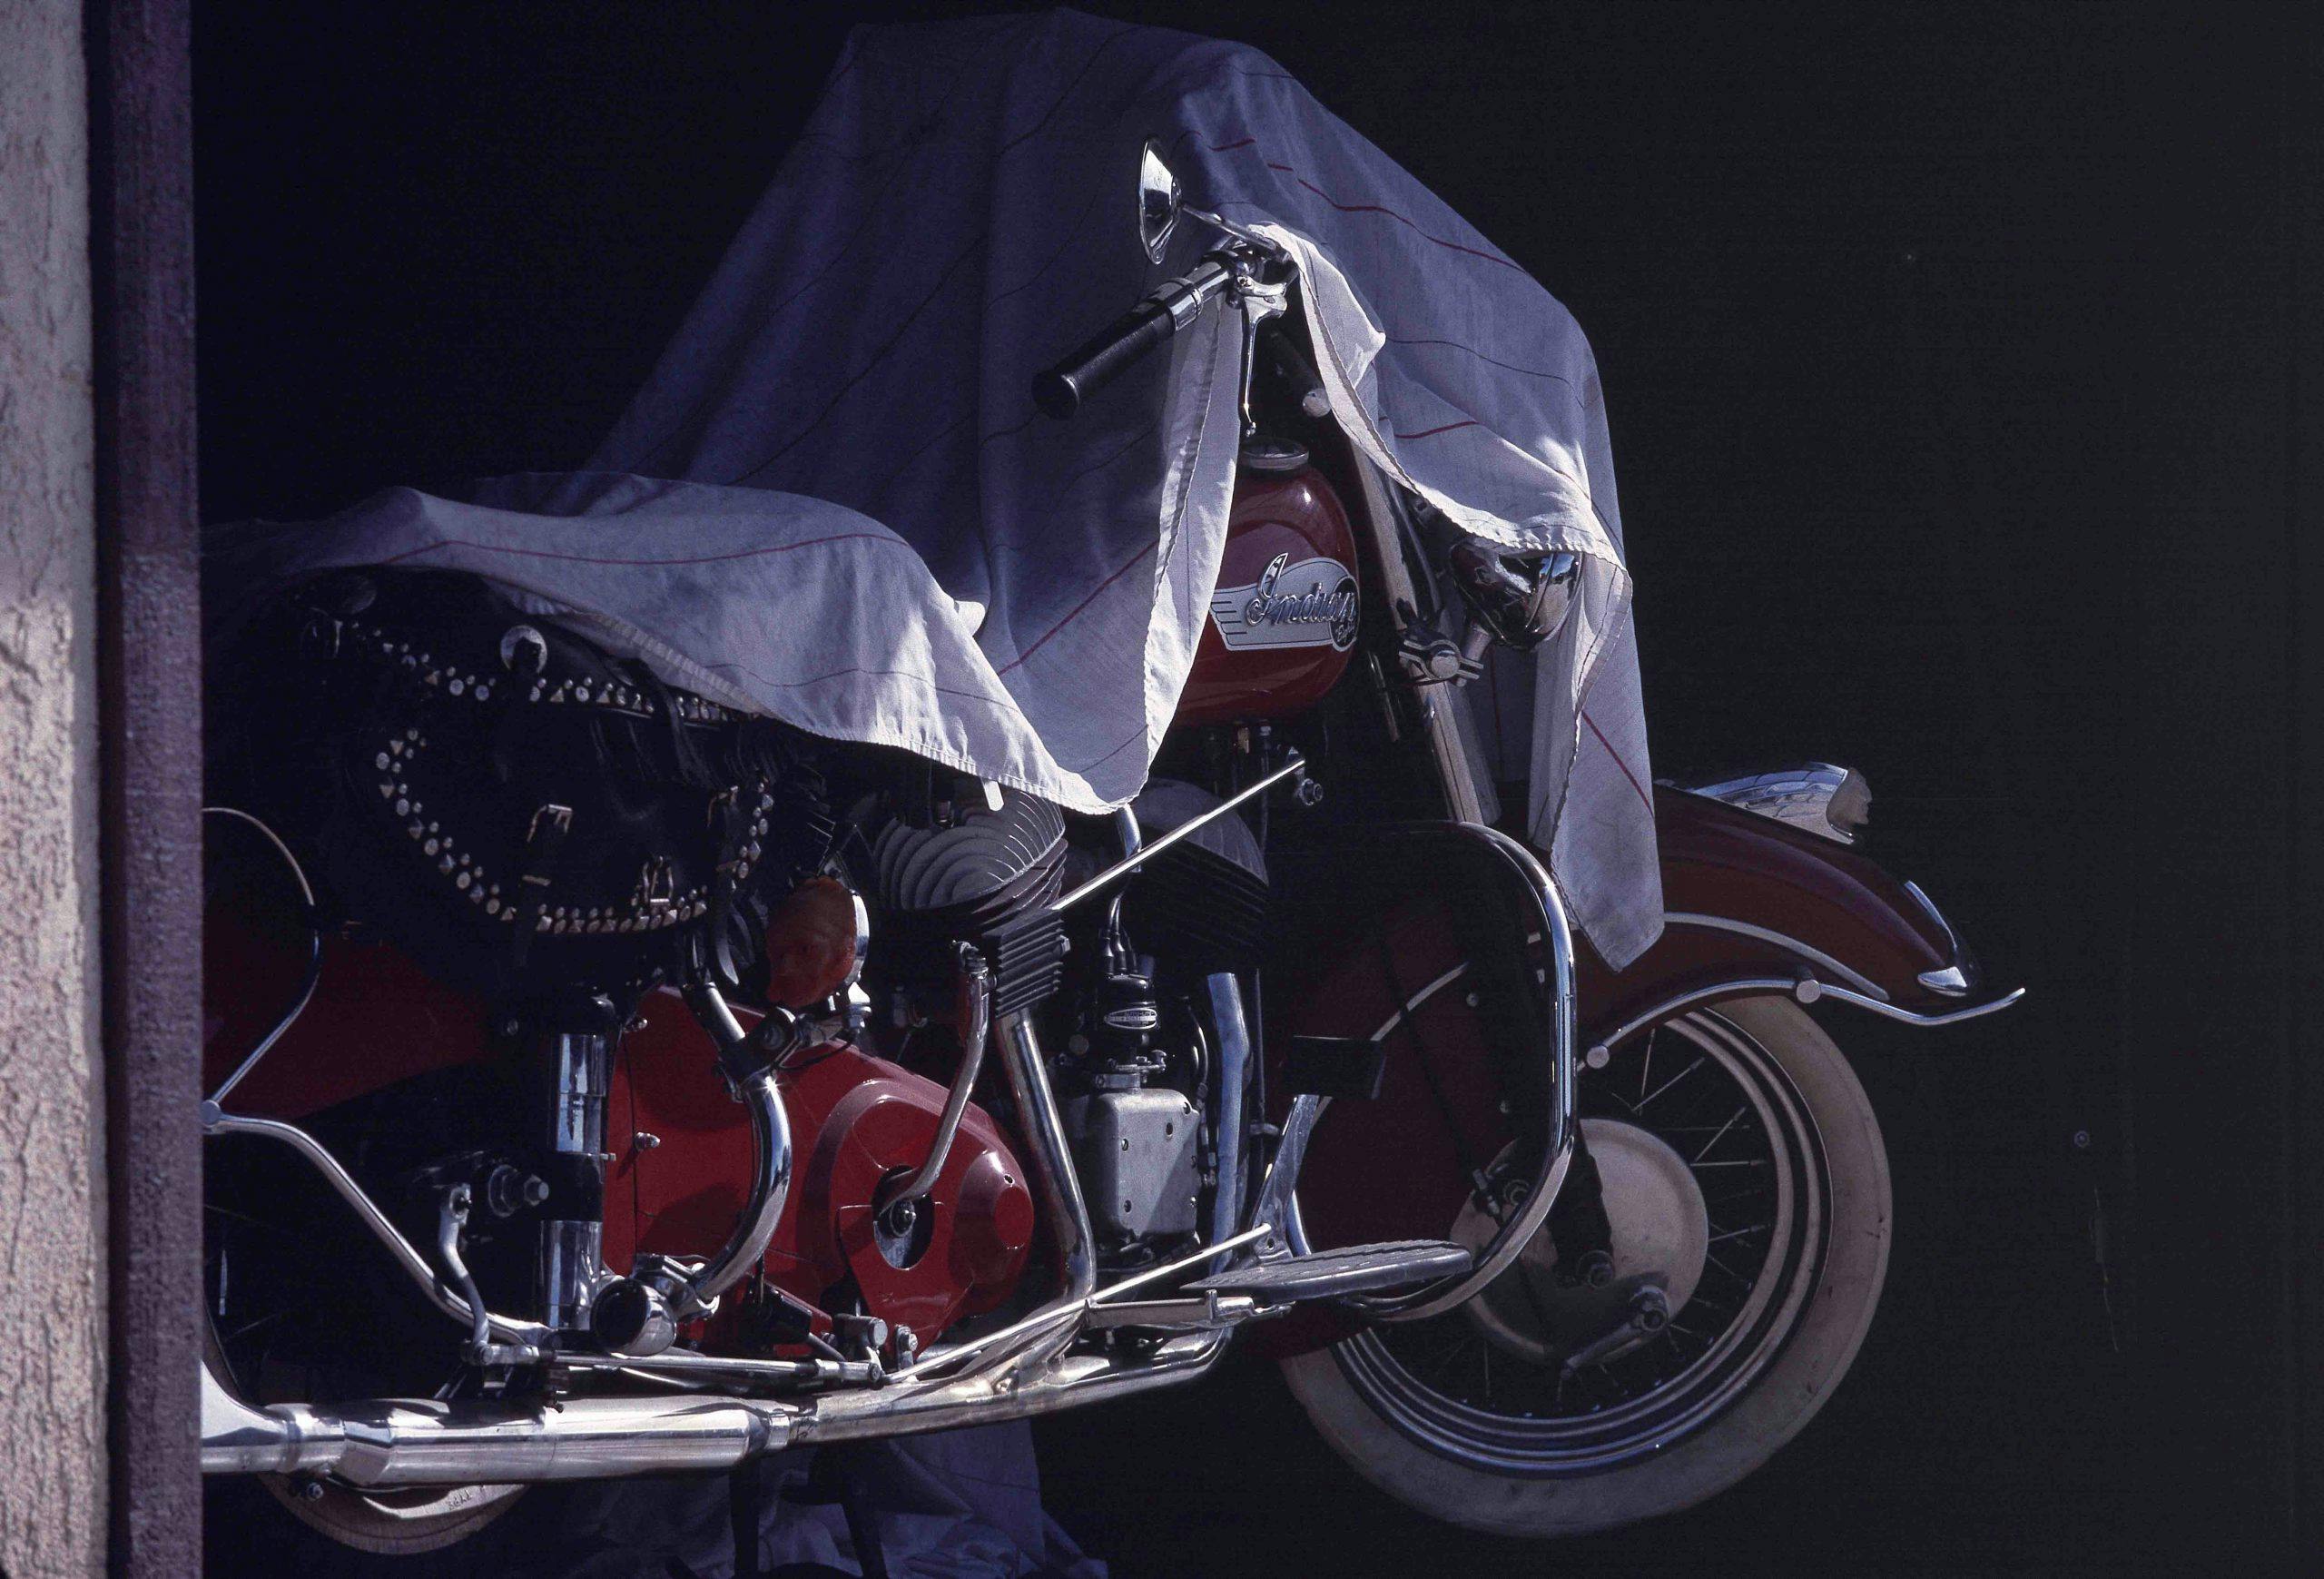 Indian Chief motorcycle cruiser under cover